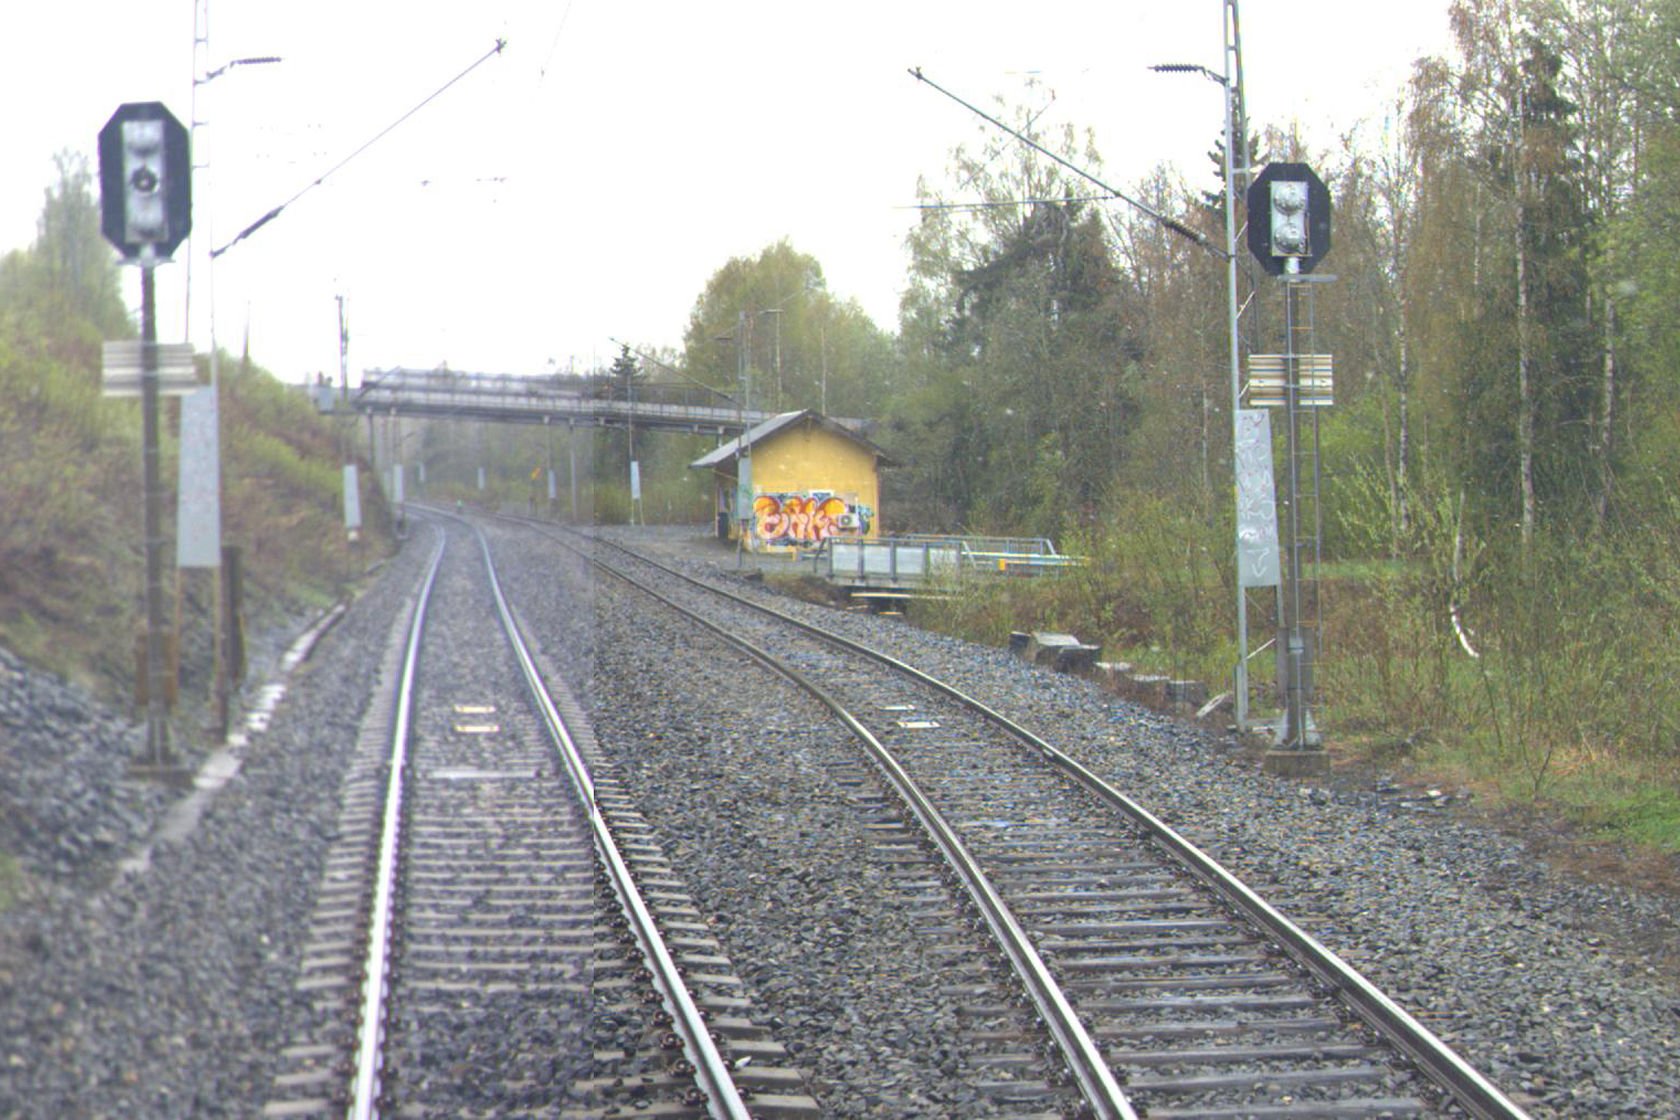 Tracks and building at Krekling station